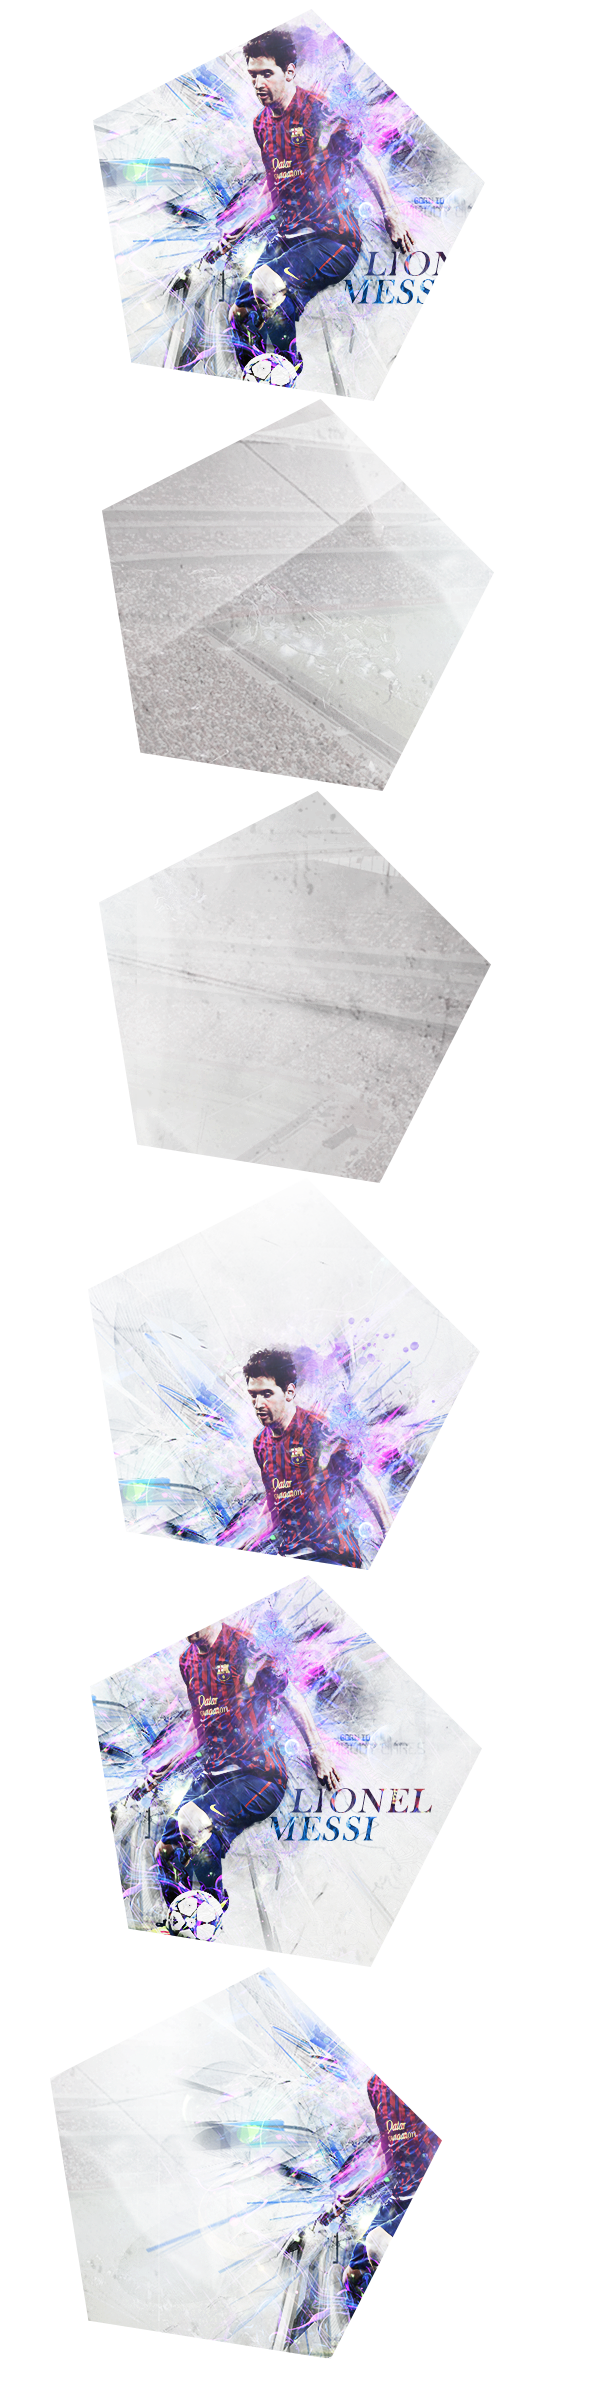 messi football wallpaper Y2014 1280x720 Reserved to as3aad